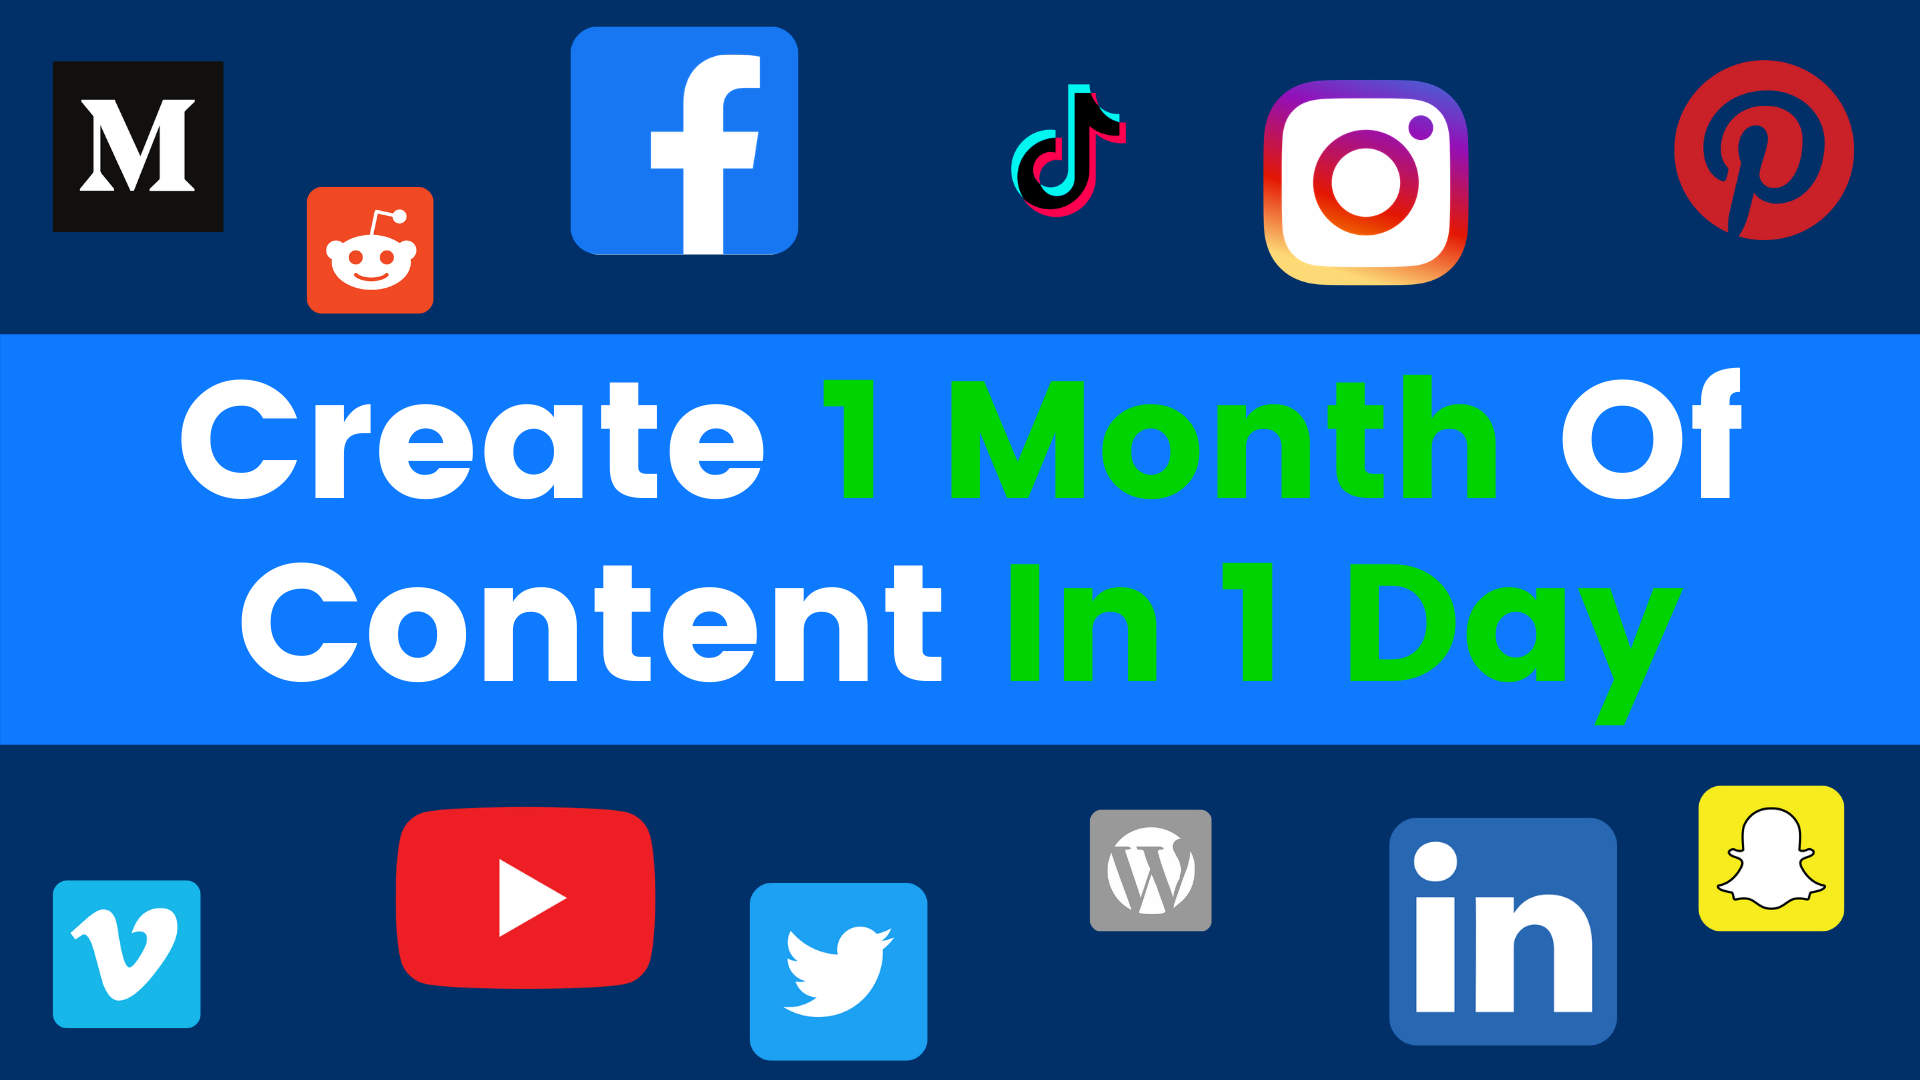 Create 1 Month Of Content In 1 Day